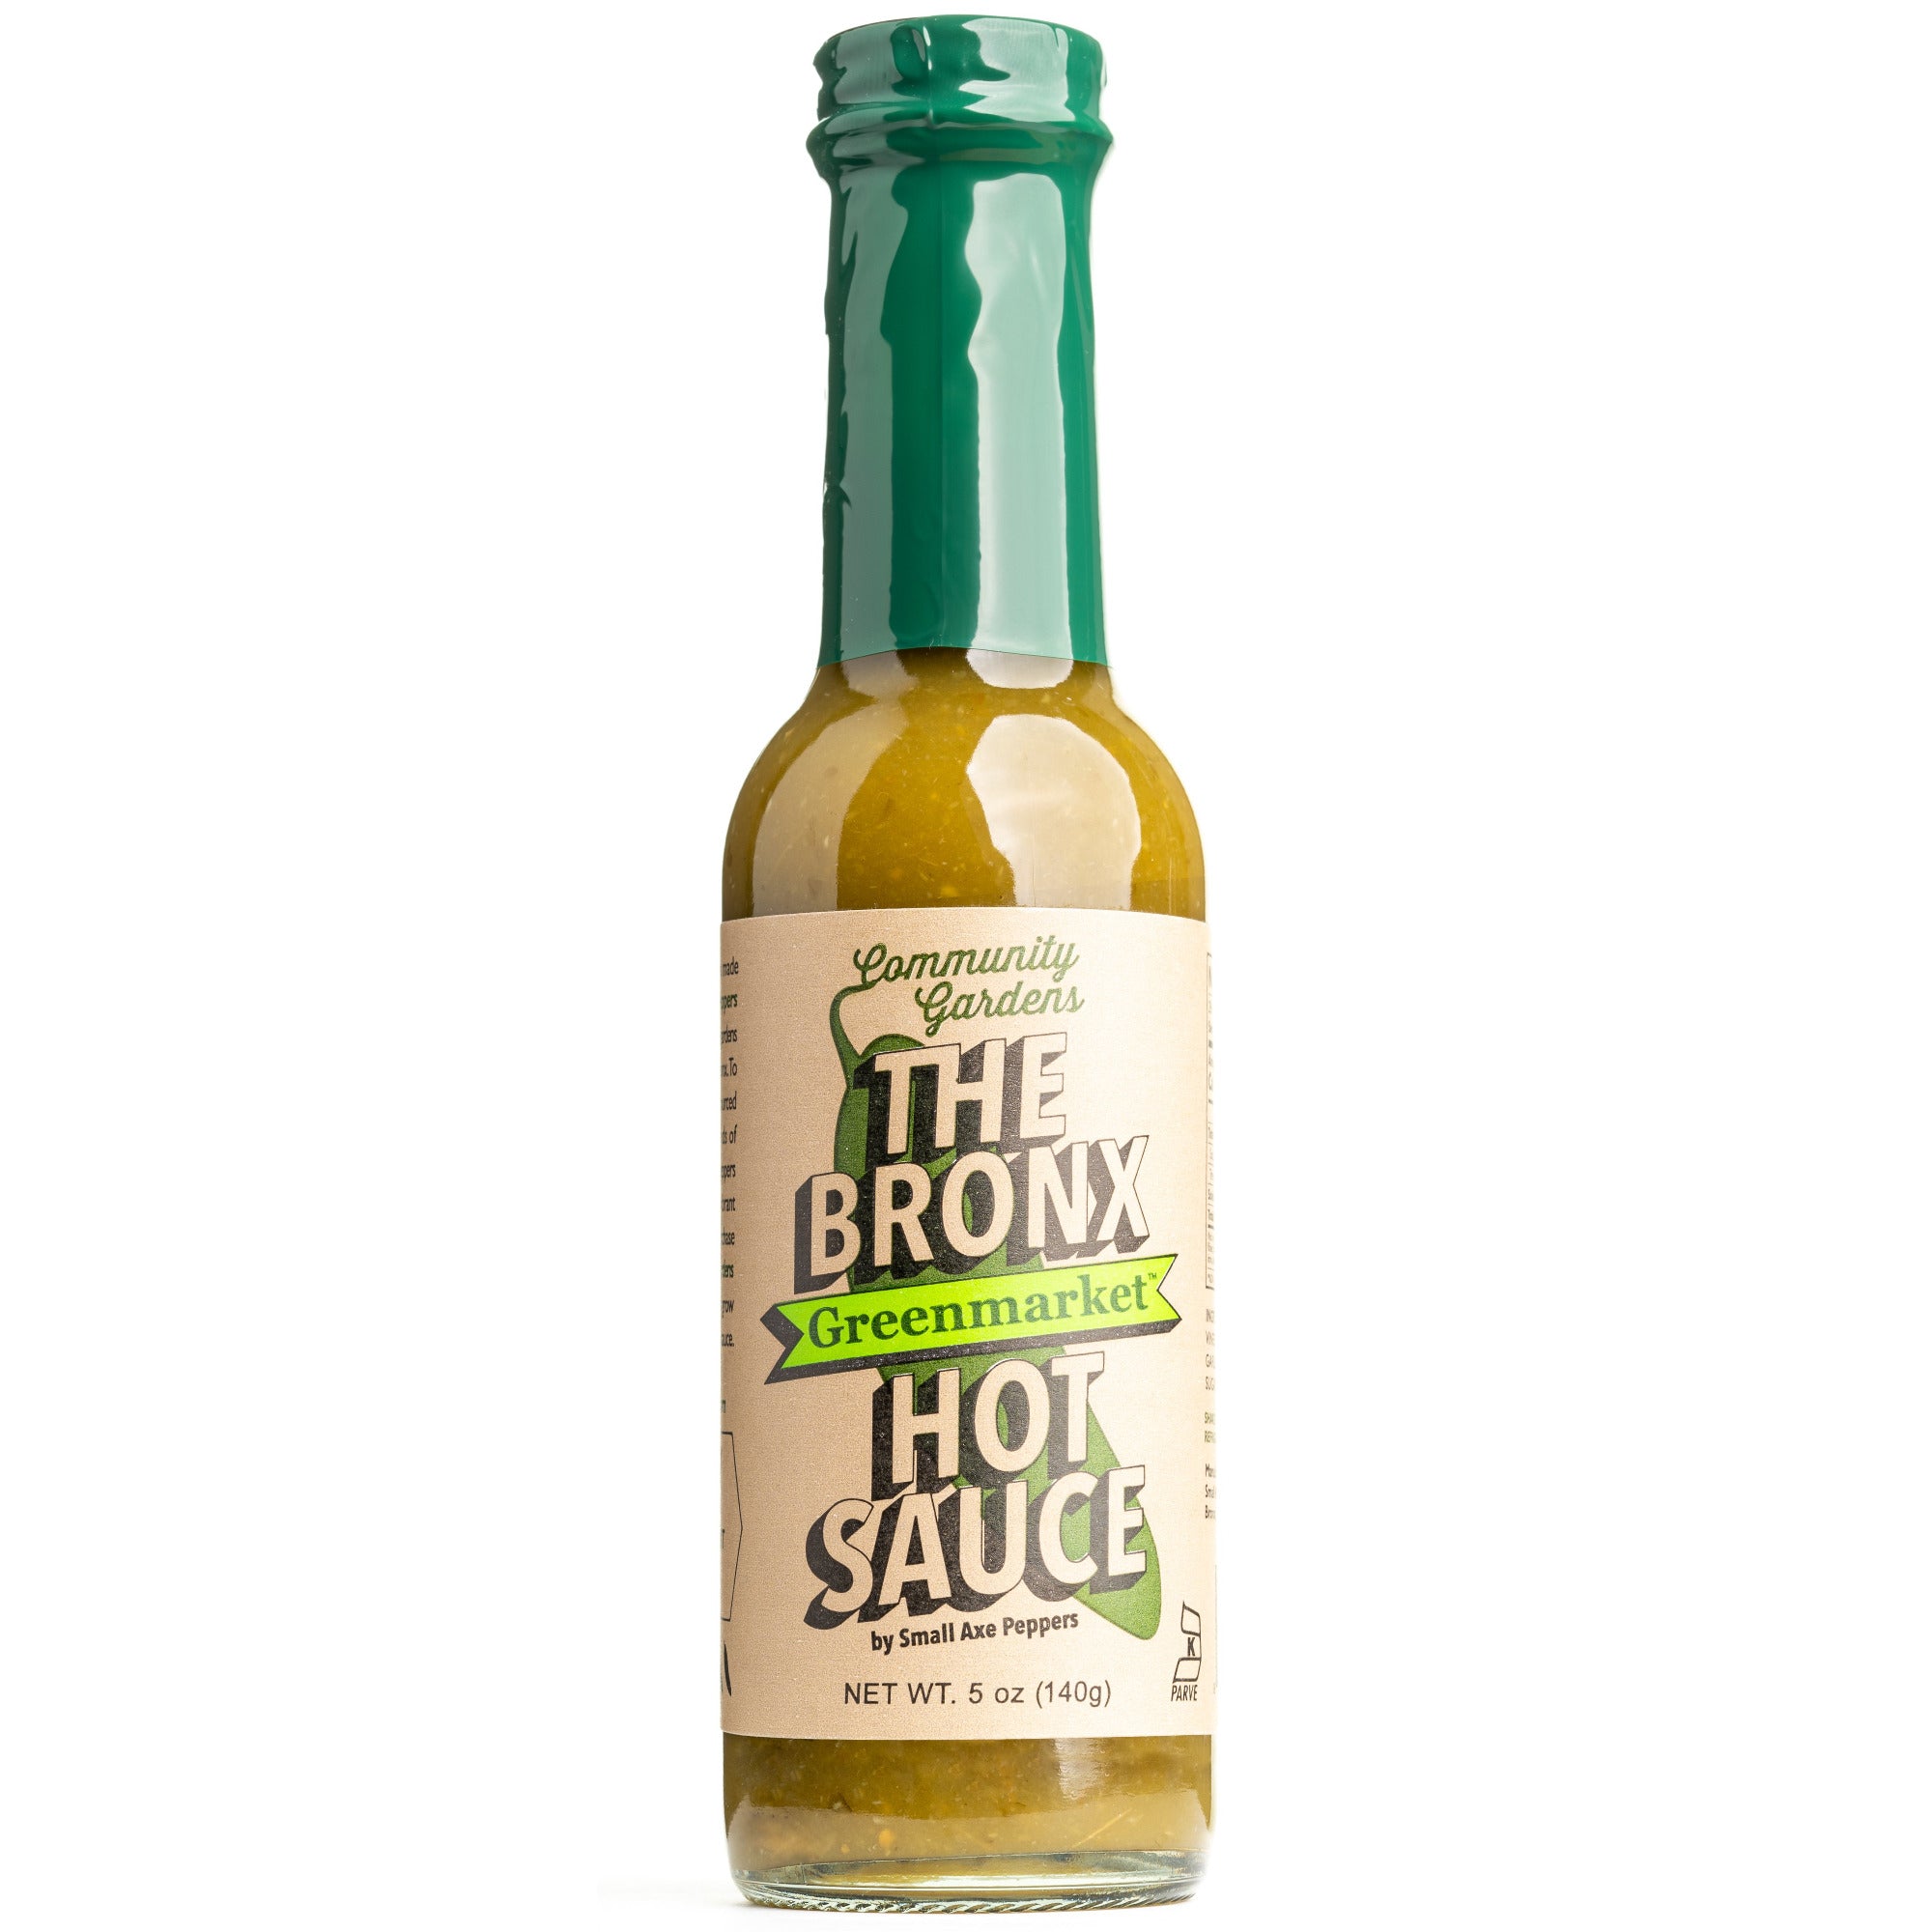 Small Axe Peppers - The Bronx Greenmarket Hot Sauce 5oz (148ml)